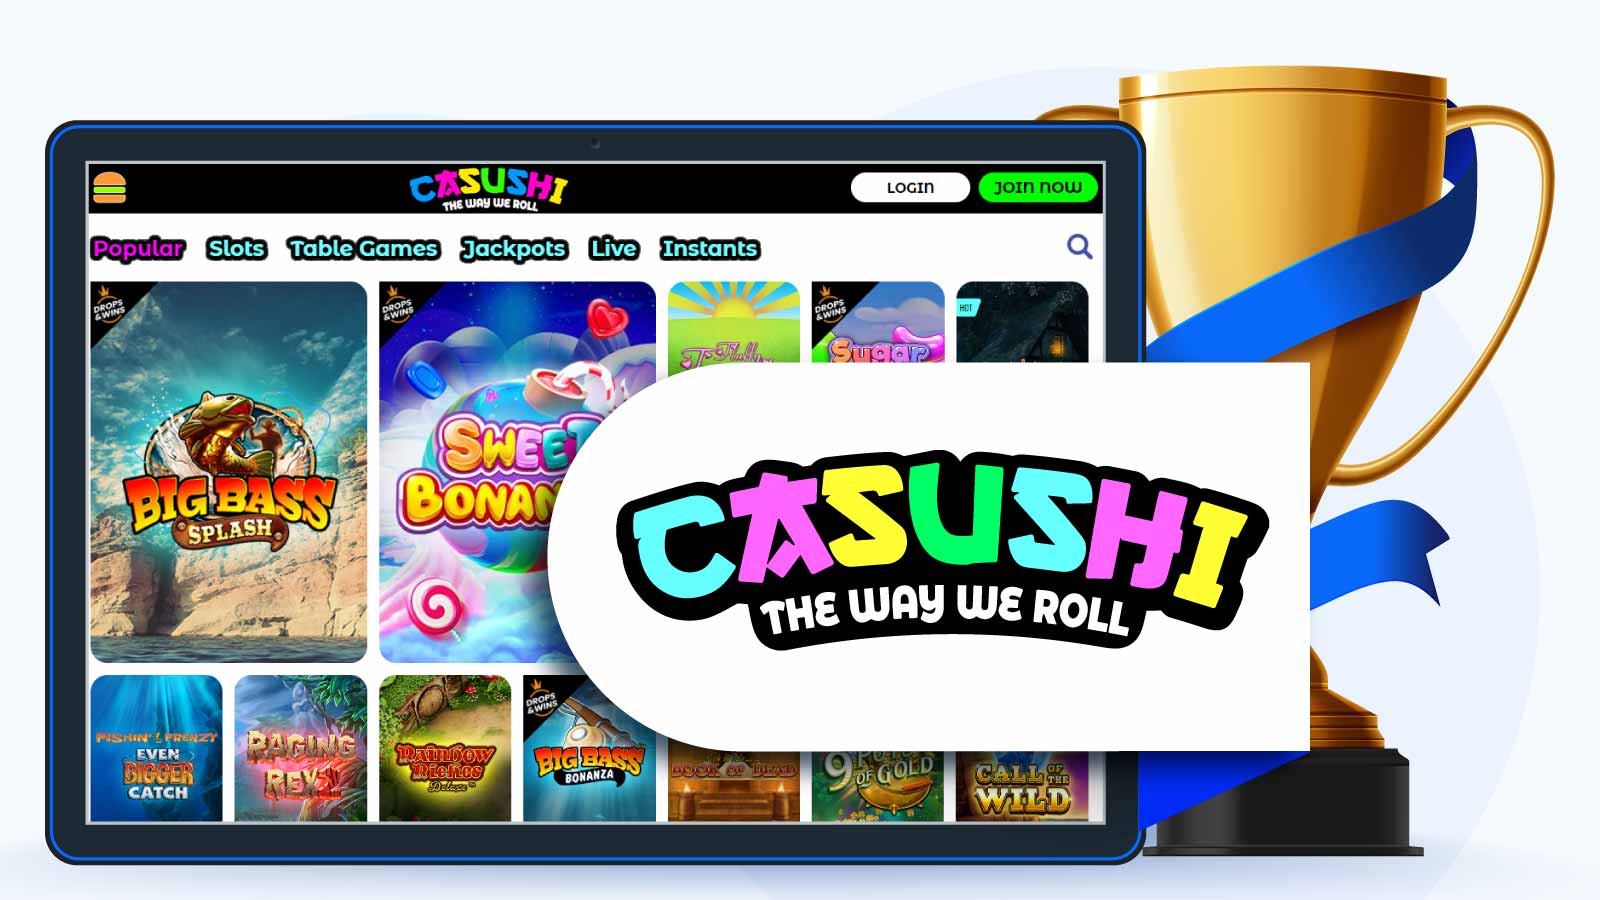 Casushi Casino – Our Overall Best Welcome Bonus